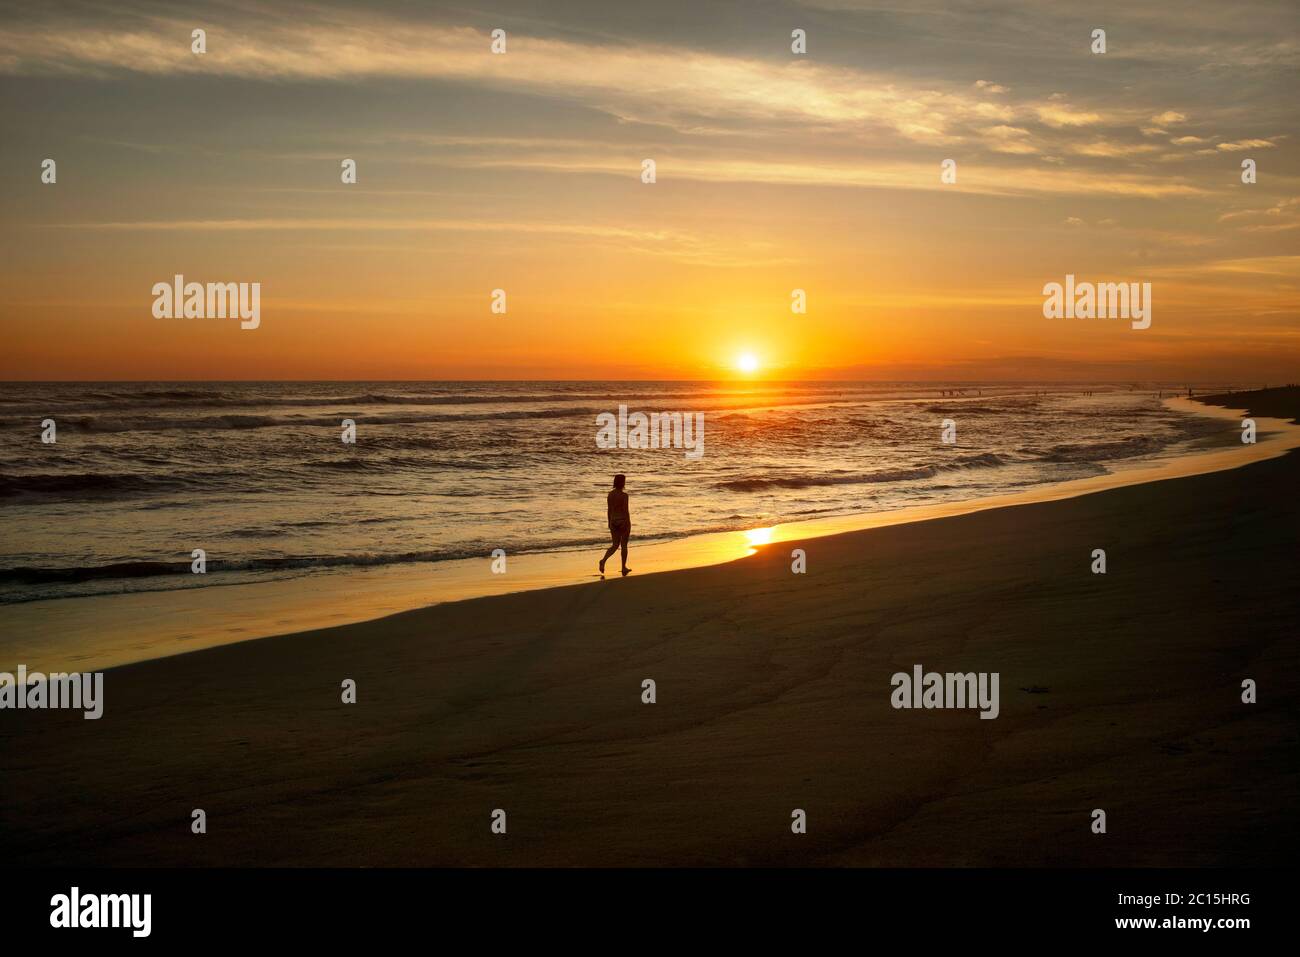 Silhouette of a woman walking on beach during sunset. El Paredón, Pacific coast, Guatemala Stock Photo